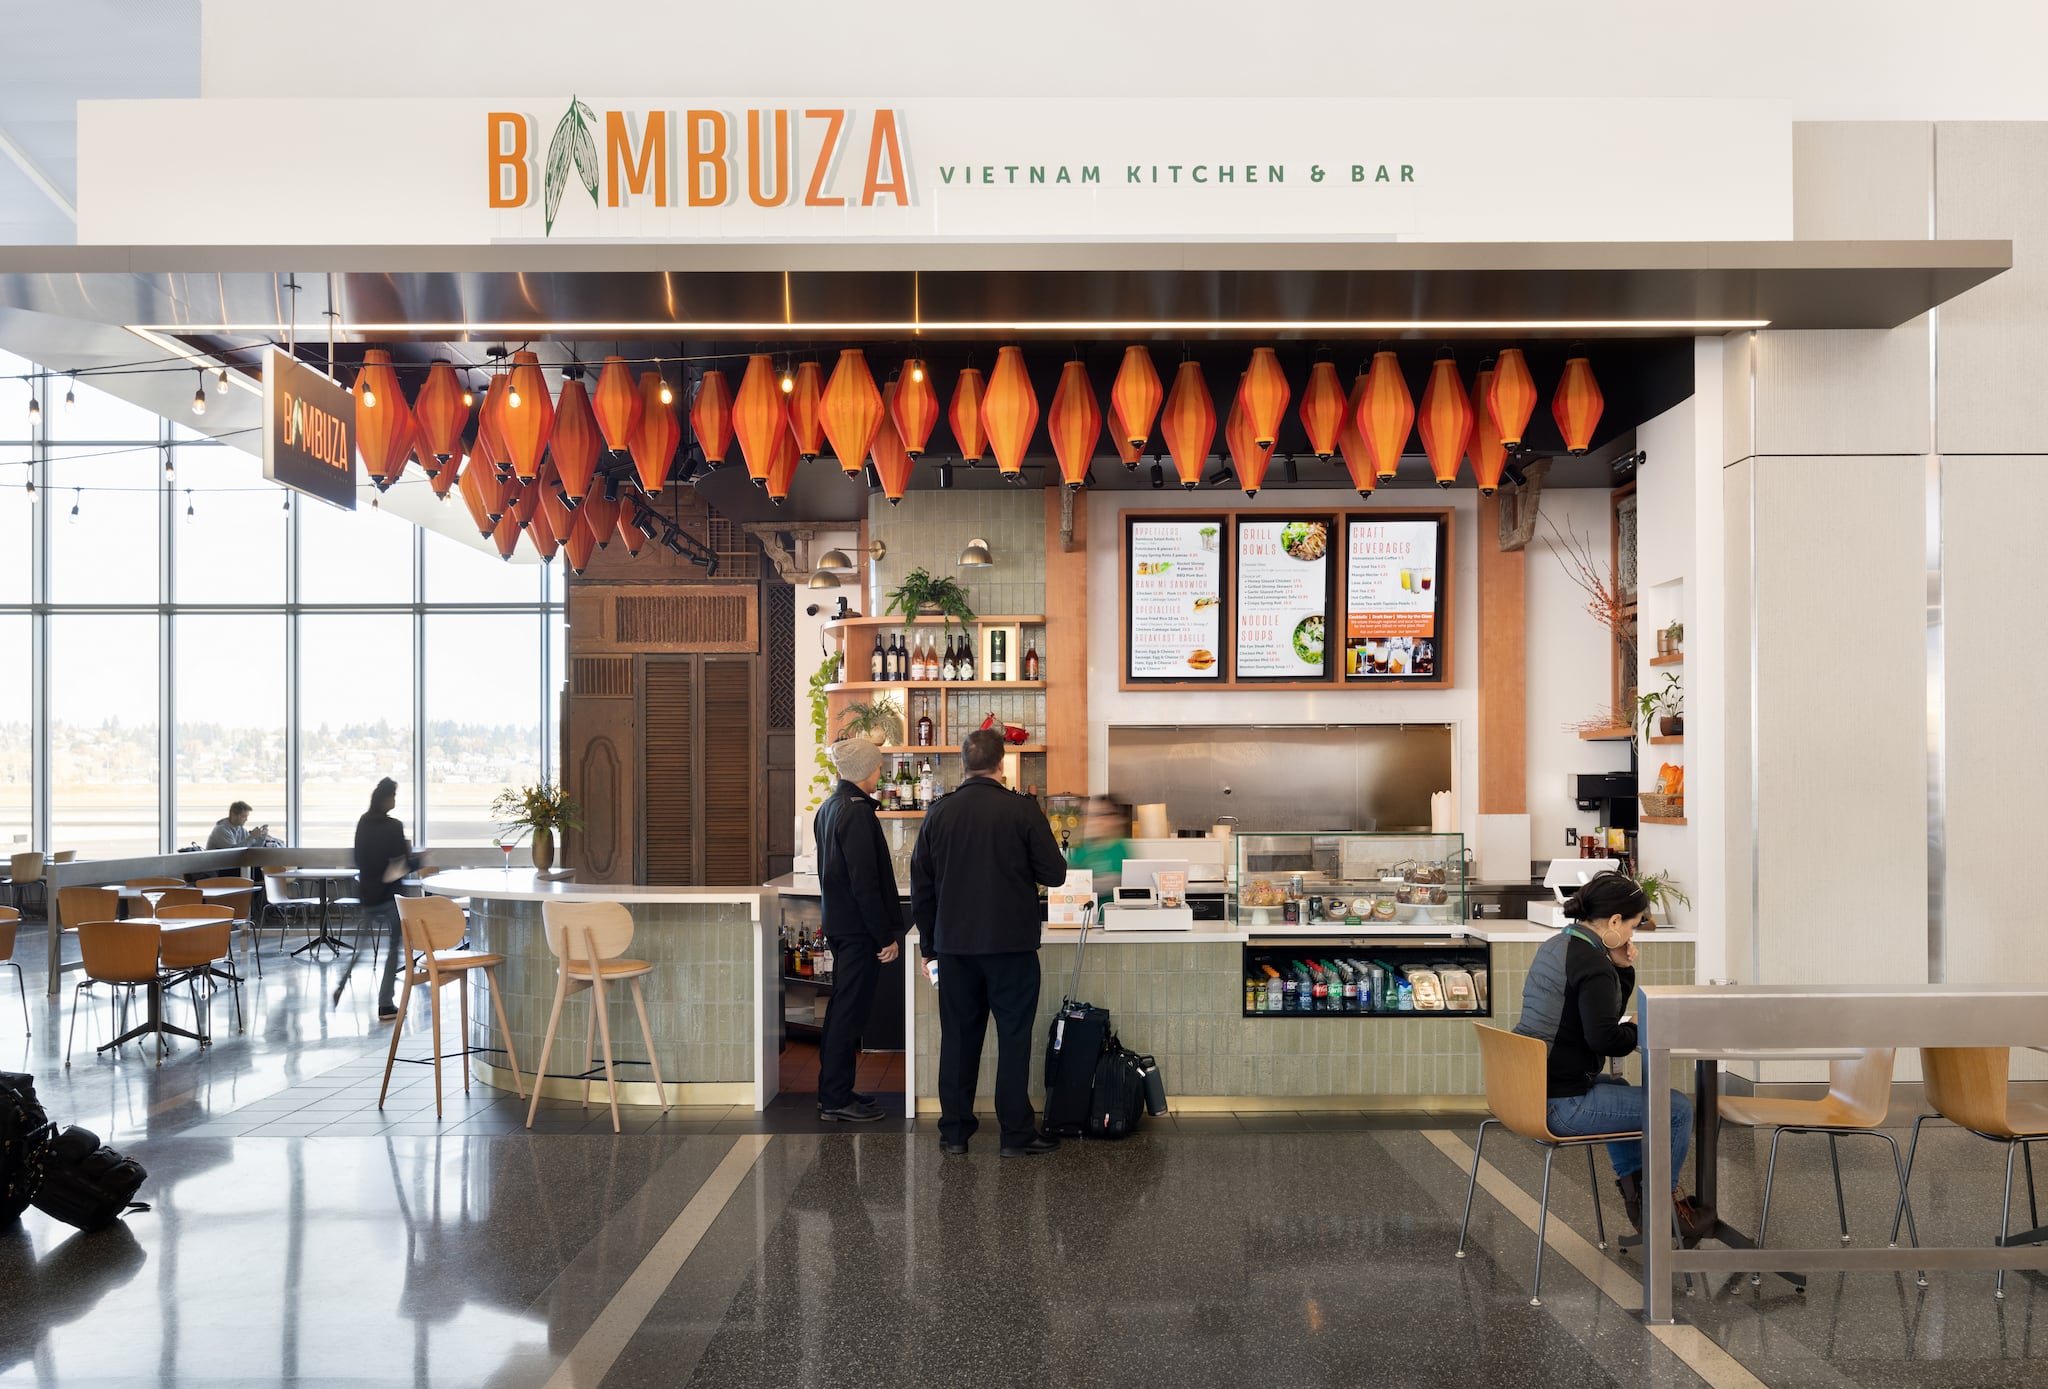 Bambuza PDX, a restaurant (commercial hospitality construction) project in Portland Airport